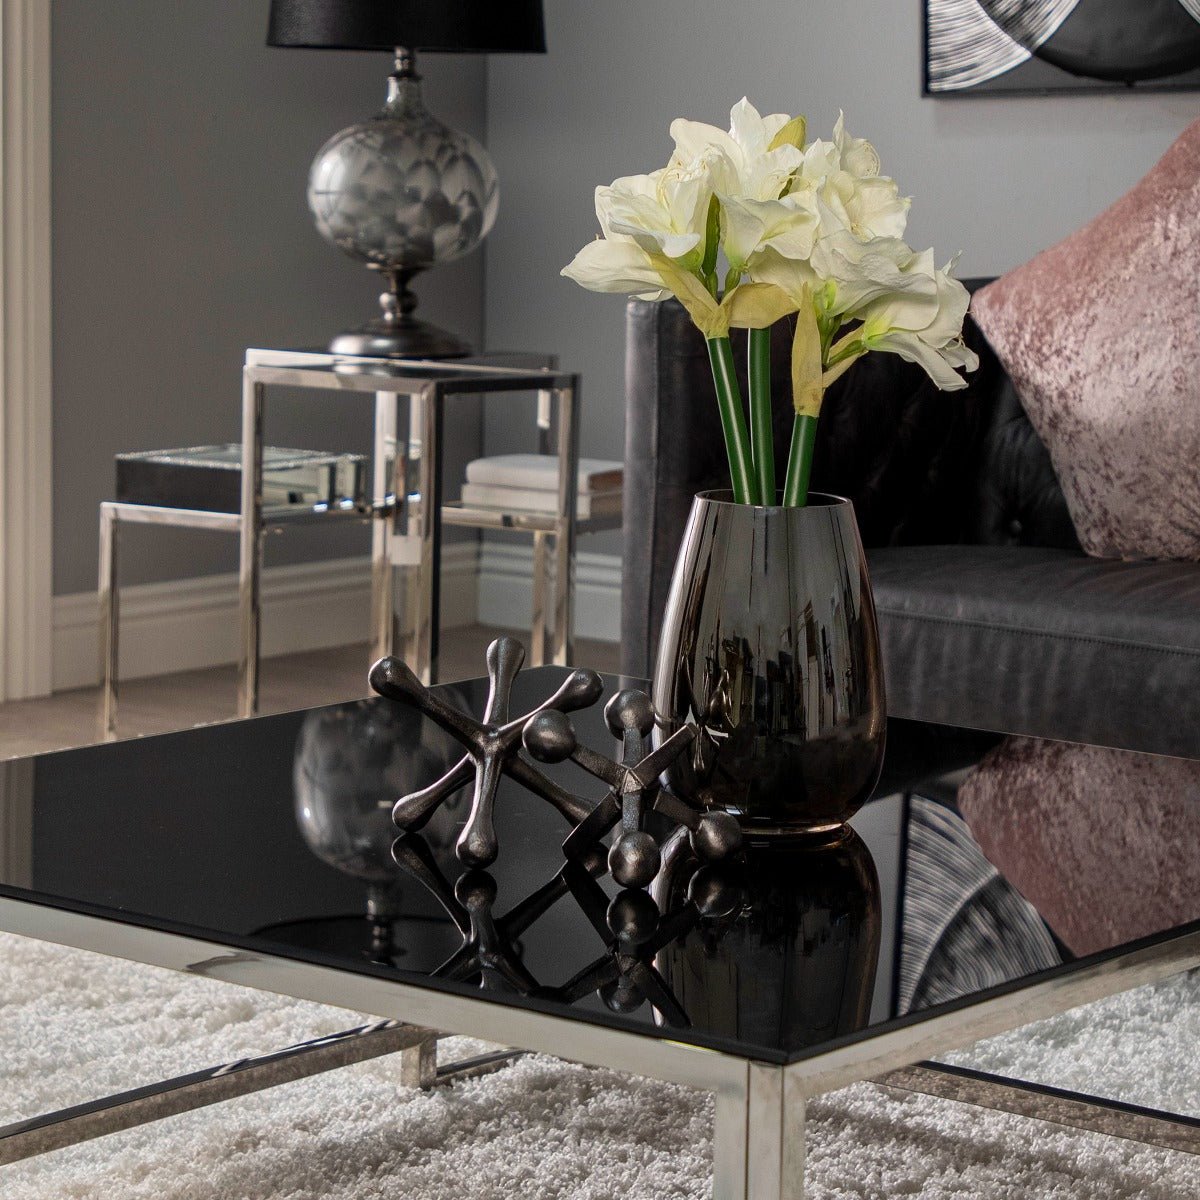 Buy Trendy Metal Home Decor And Accents Online